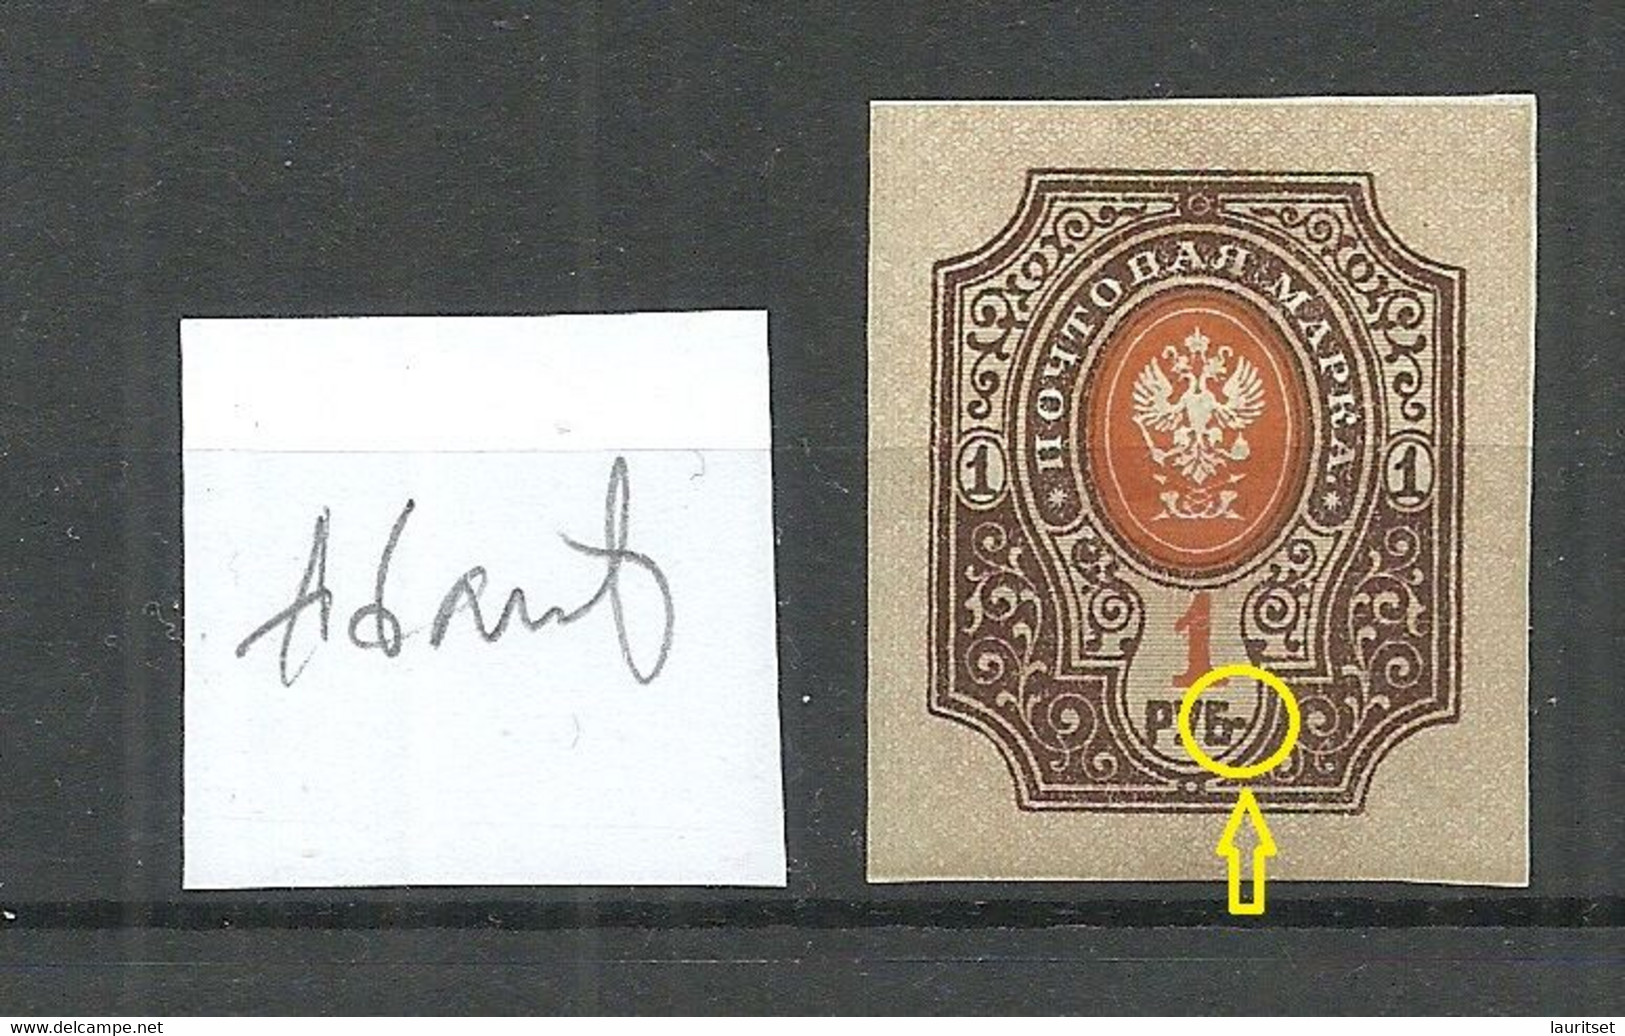 RUSSLAND RUSSIA 1919 Michel 77 B MNH Error Perforation Variety Abart = Brown Spot In Stamp Printing Color After PUB - Errors & Oddities